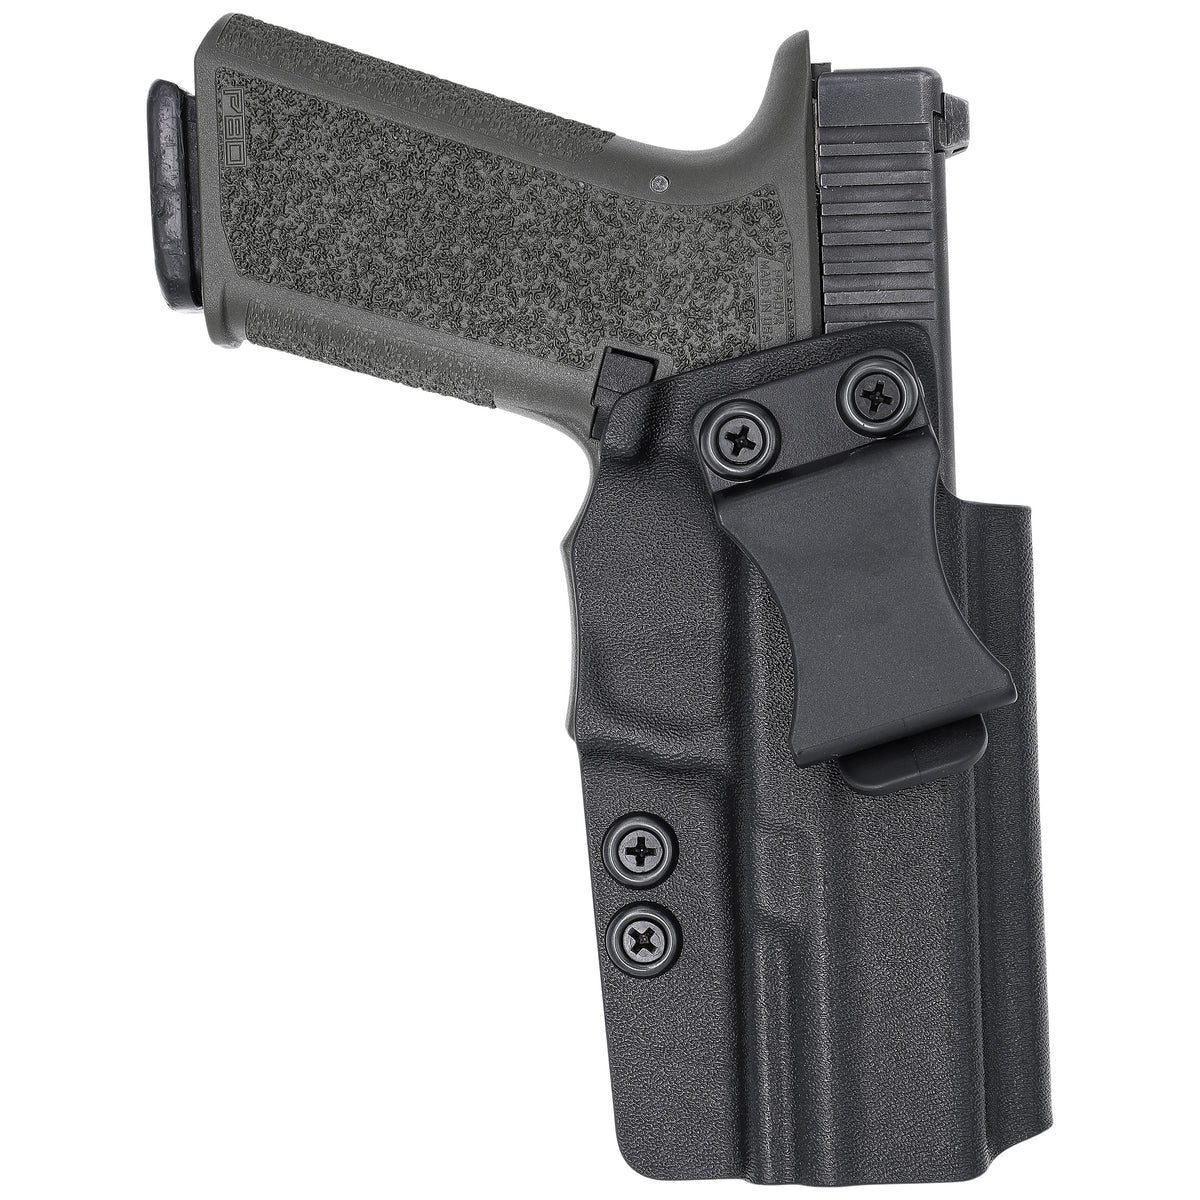 Polymer 80 PF940 V2 IWB Optics Ready - Concealed Carry Holsters